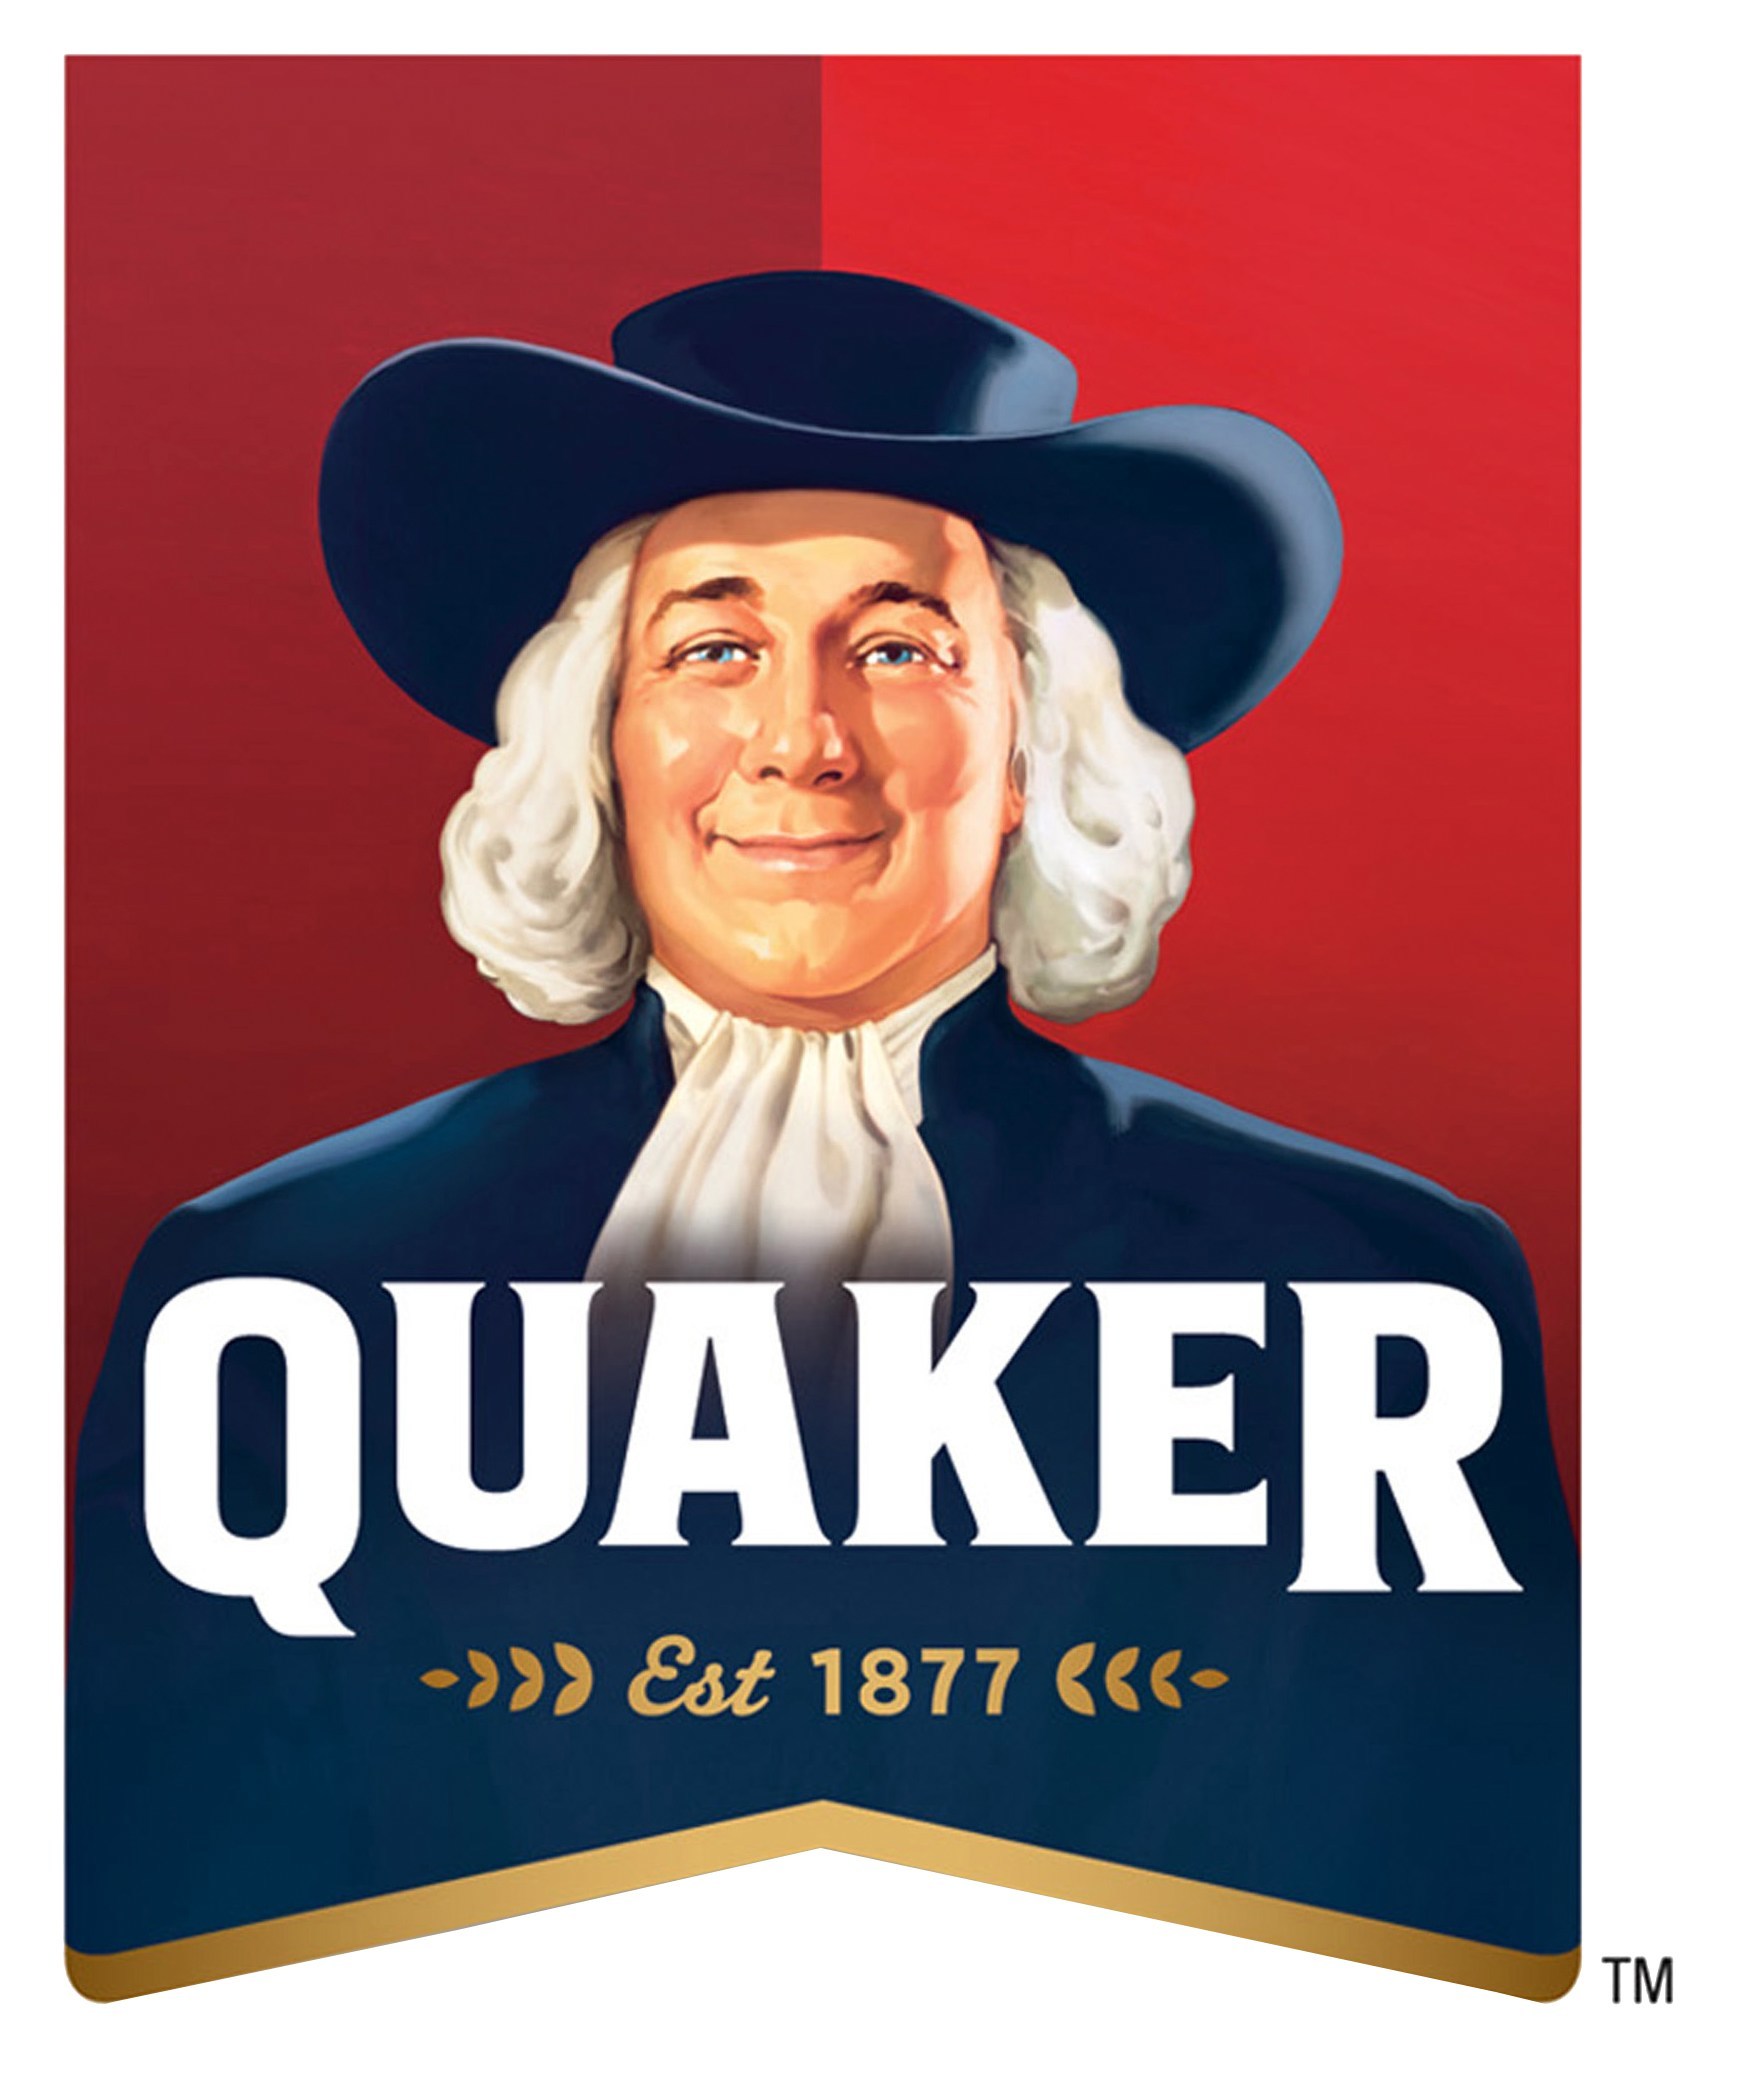 Quaker Oats Company, est. 1877 - Made-in-Chicago Museum